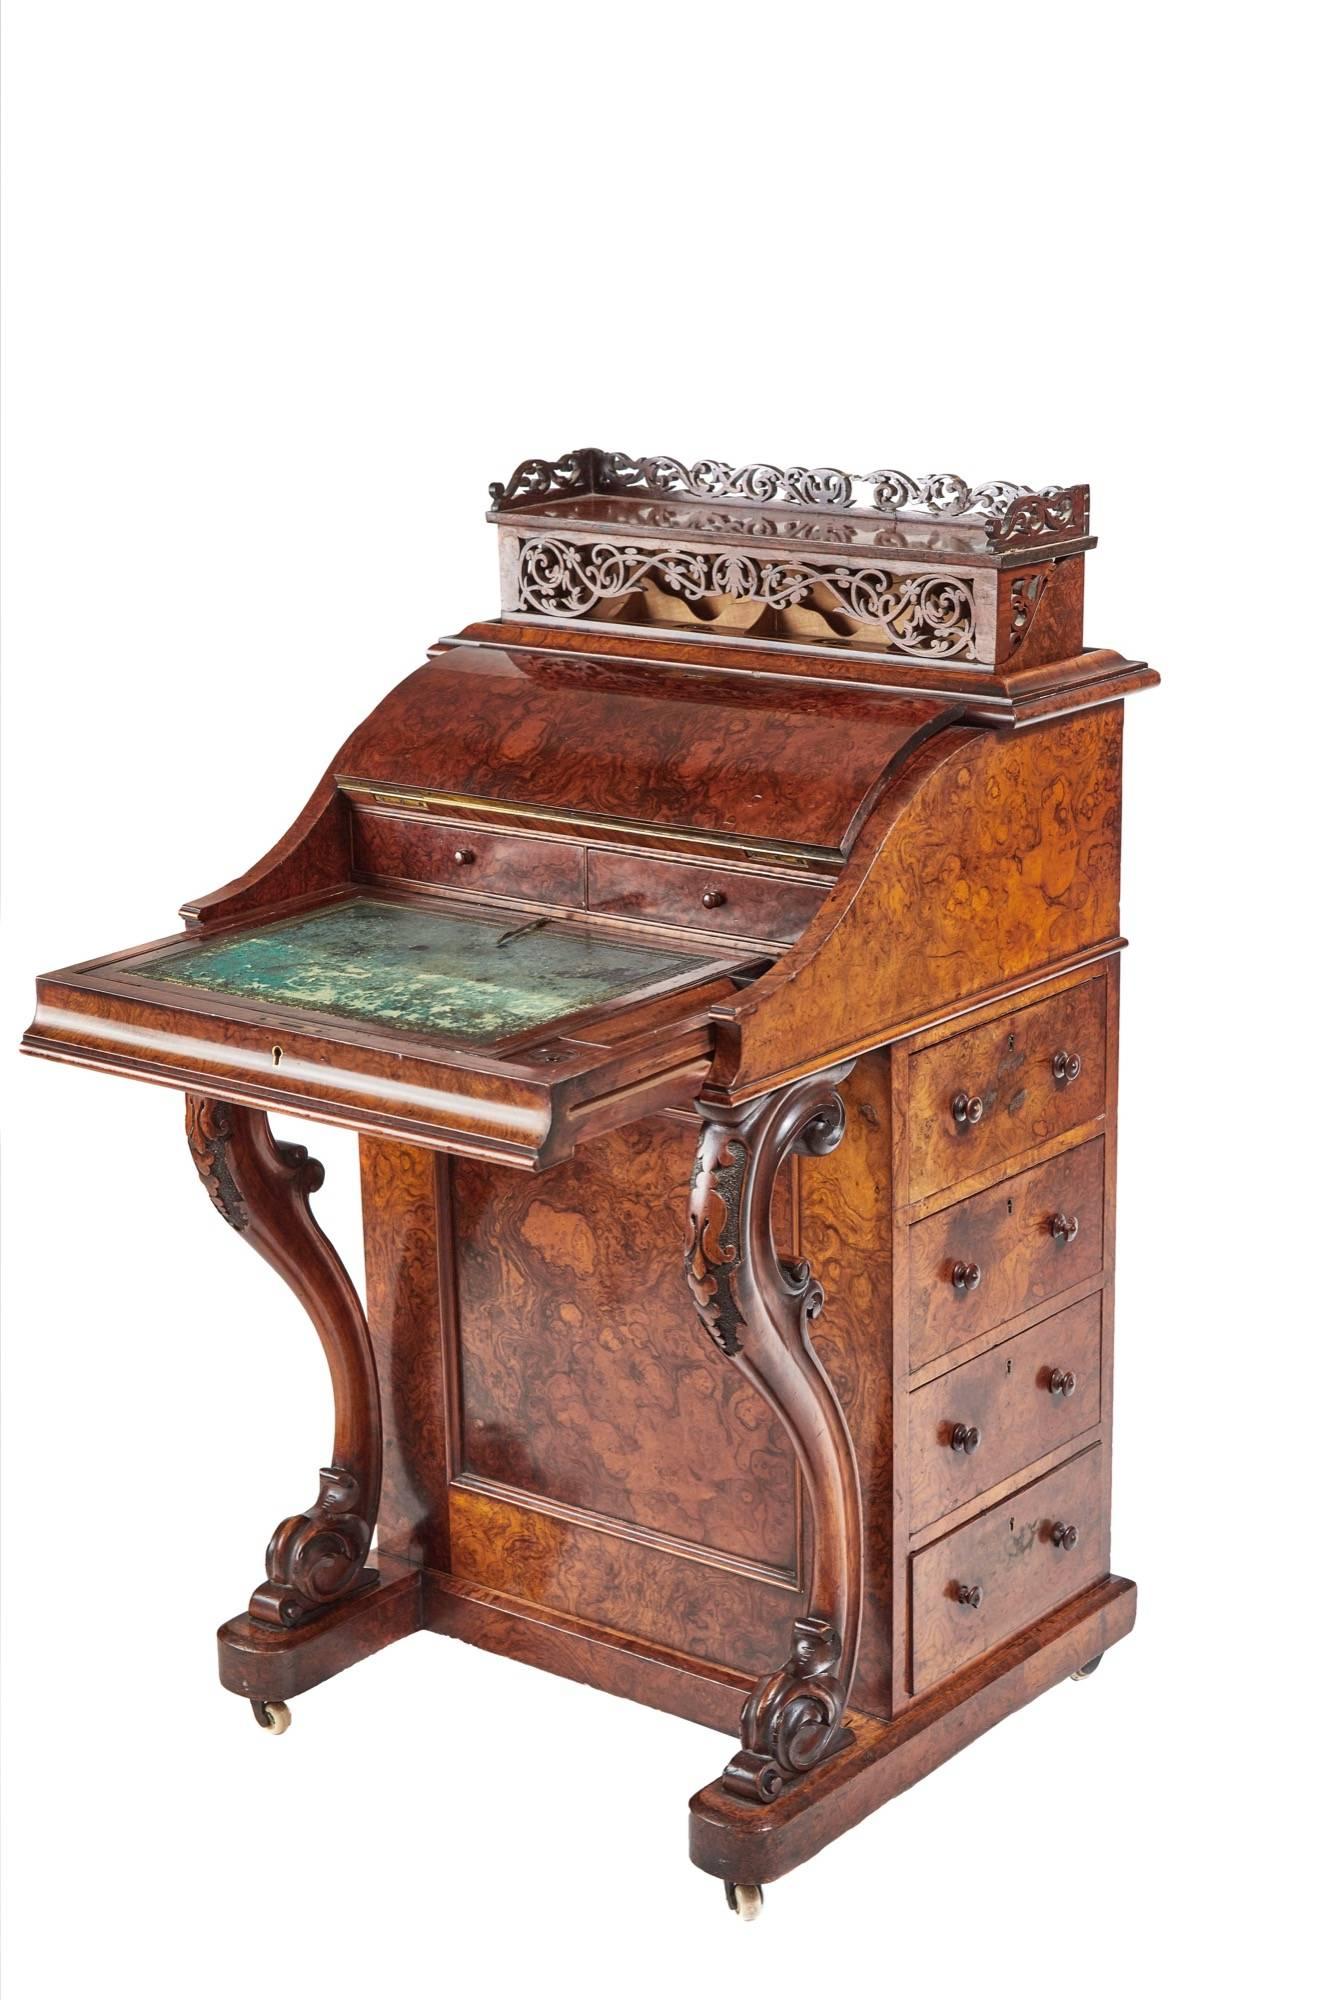 A fantastic burr walnut piano top Davenport, with a pop up top, and a pull-out writing slide with the original tooled leather writing surface fitted lidded pen and ink boxes, secret button to release sprung top with a fantastic fretwork panel